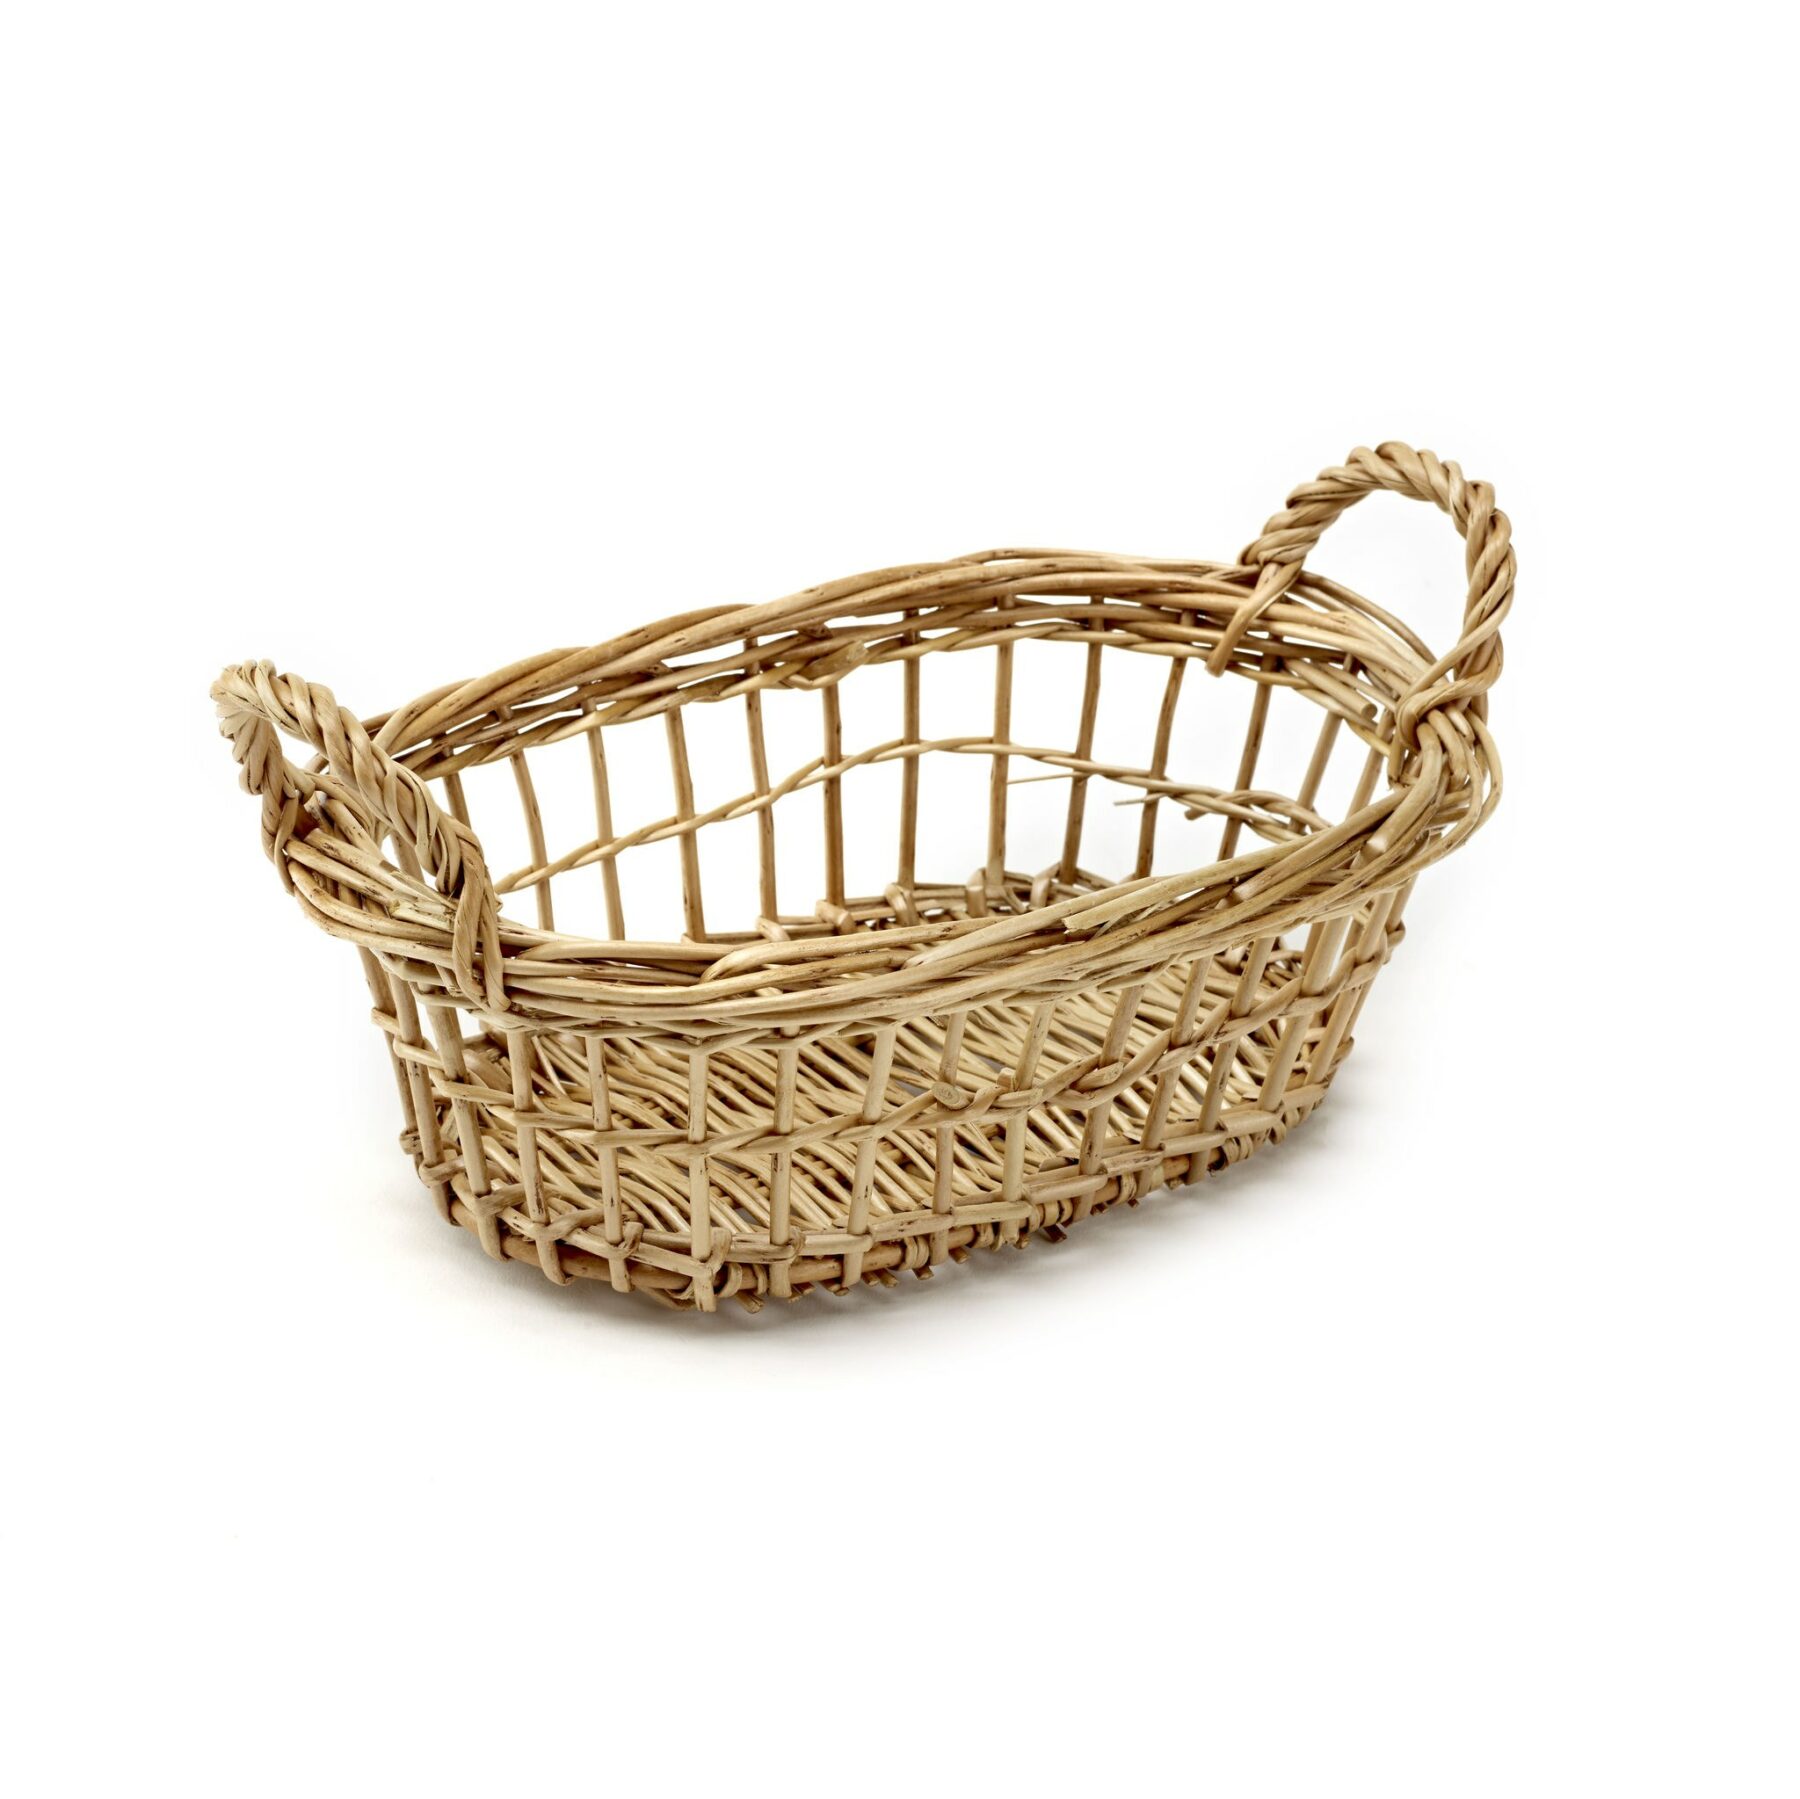 Oval Open Weave Basket with Handles